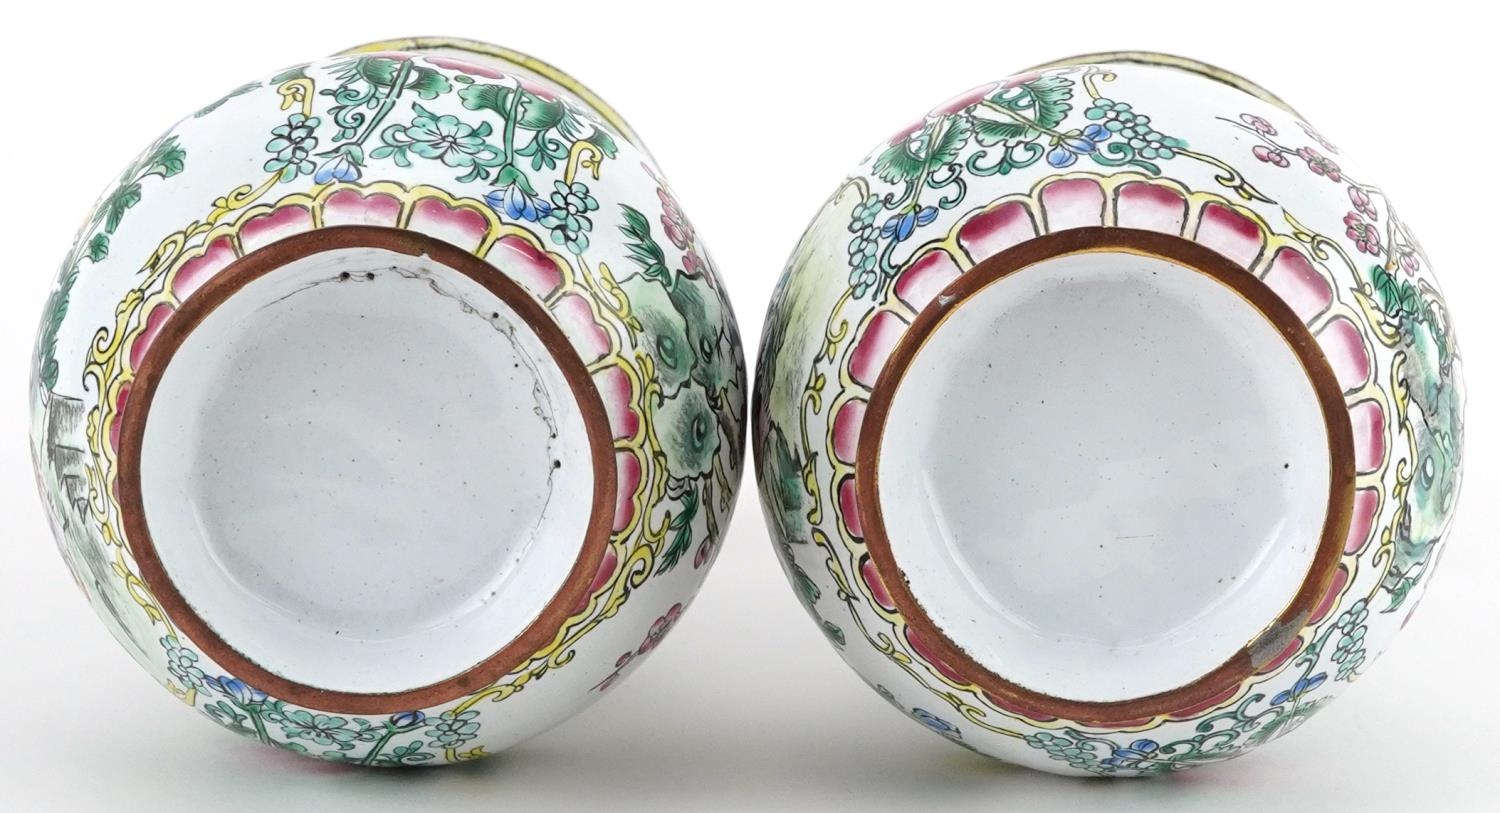 Pair of Chinese Canton enamelled vases hand painted with birds and ducks amongst flowers, each - Image 6 of 6